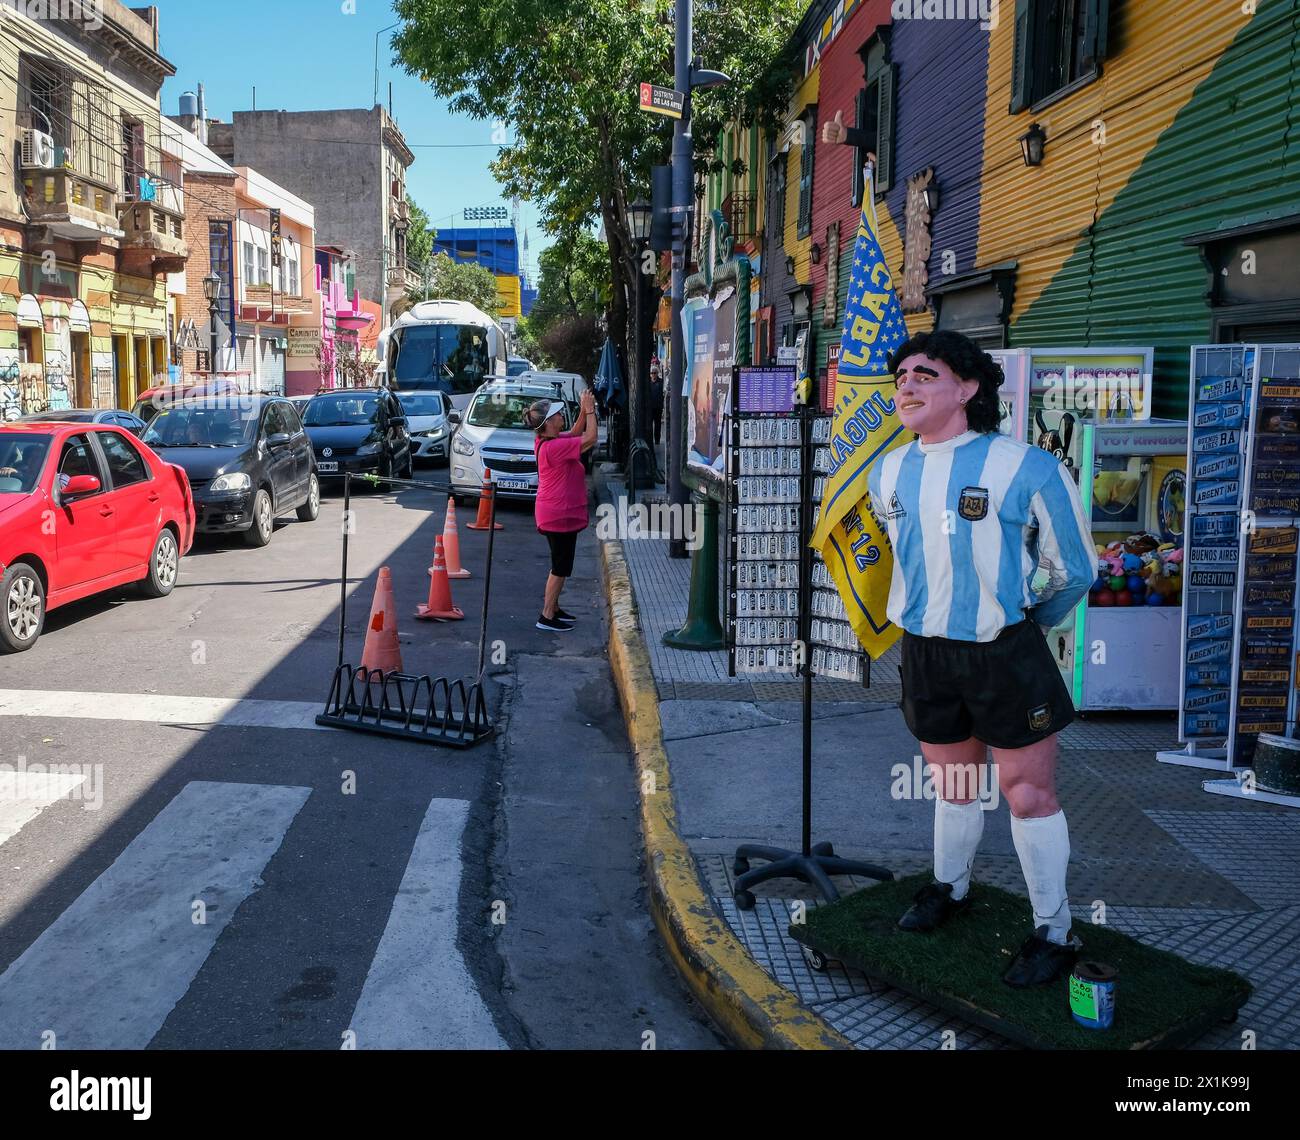 La Boca, Buenos Aires, Argentina - The figure of football legend Diego Maradona greets tourists in front of a shop. At the back, the La Bombonera stad Stock Photo